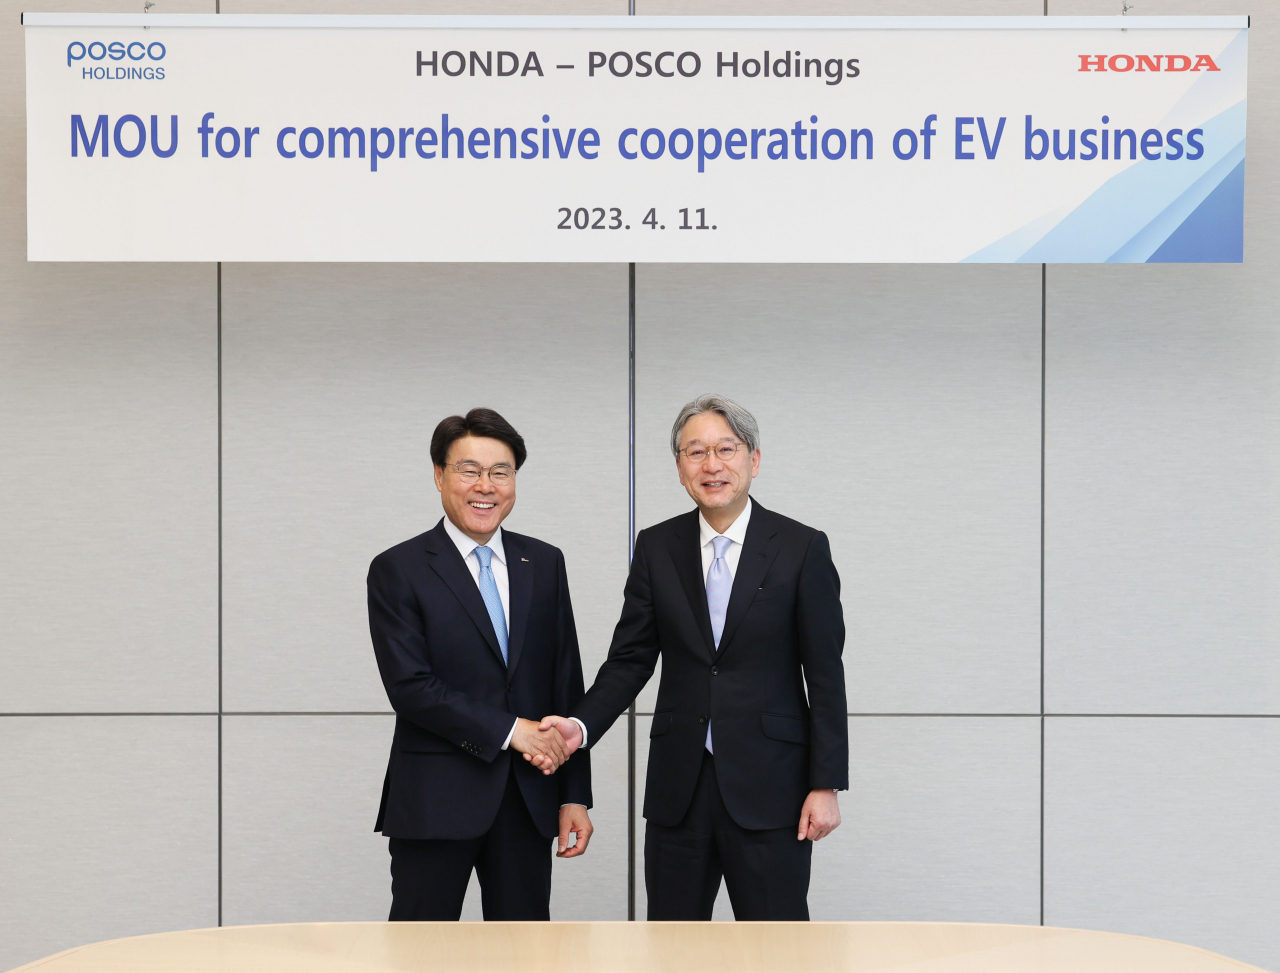 Posco Group Chairman Choi Jeong-woo (left) and Honda CEO Toshihiro Mibe shake hands after a memorandum of understanding signing ceremony held at the Posco Center in Seoul on Tuesday. (Posco Group)